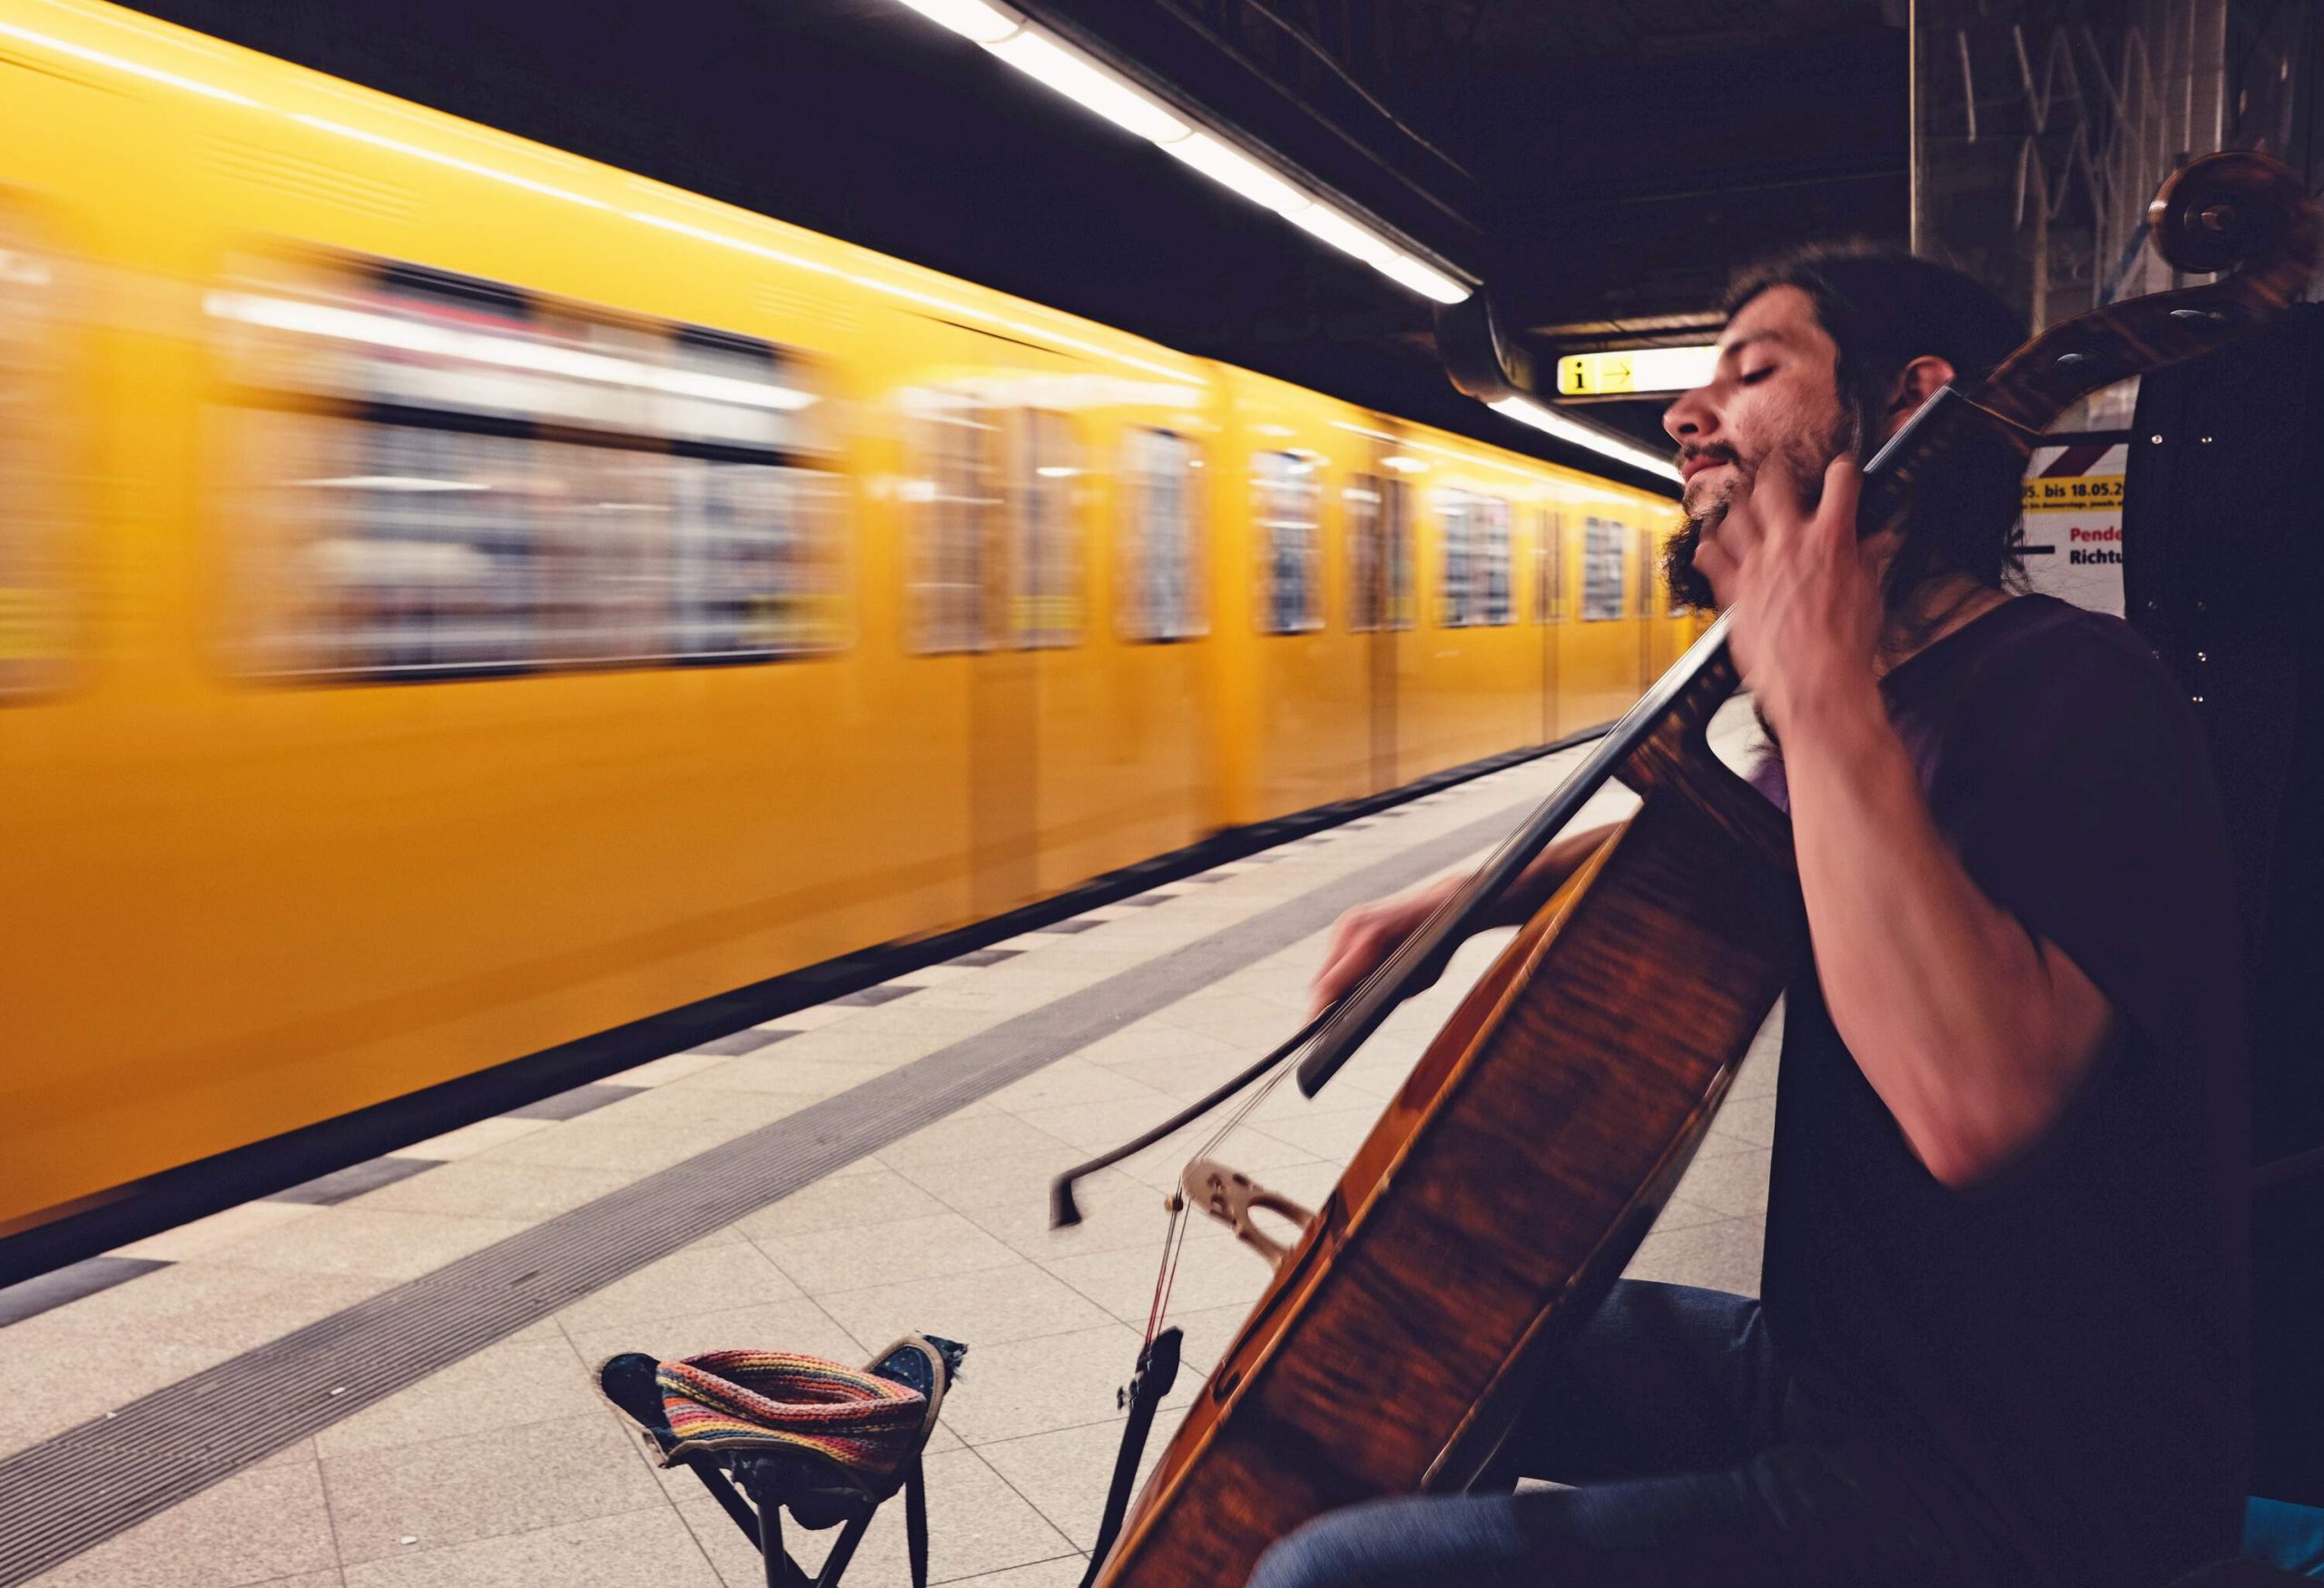 A street performer playing cello in a metro station as a yellow trains goes by. 